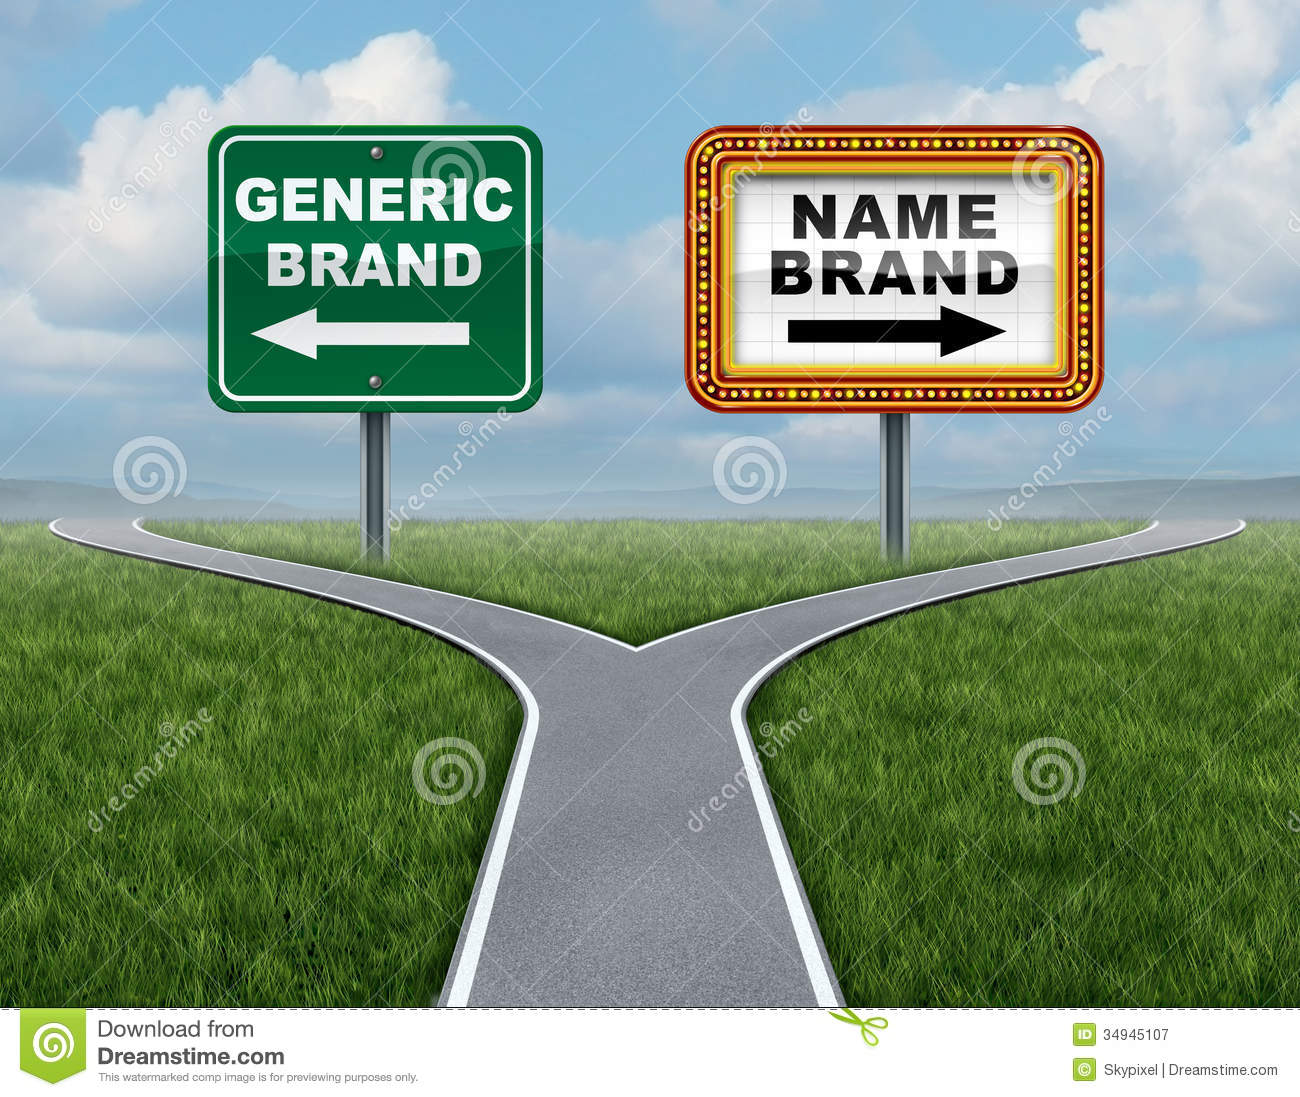 Royalty Free Stock Photography  Generic Brand Versus Brand Name